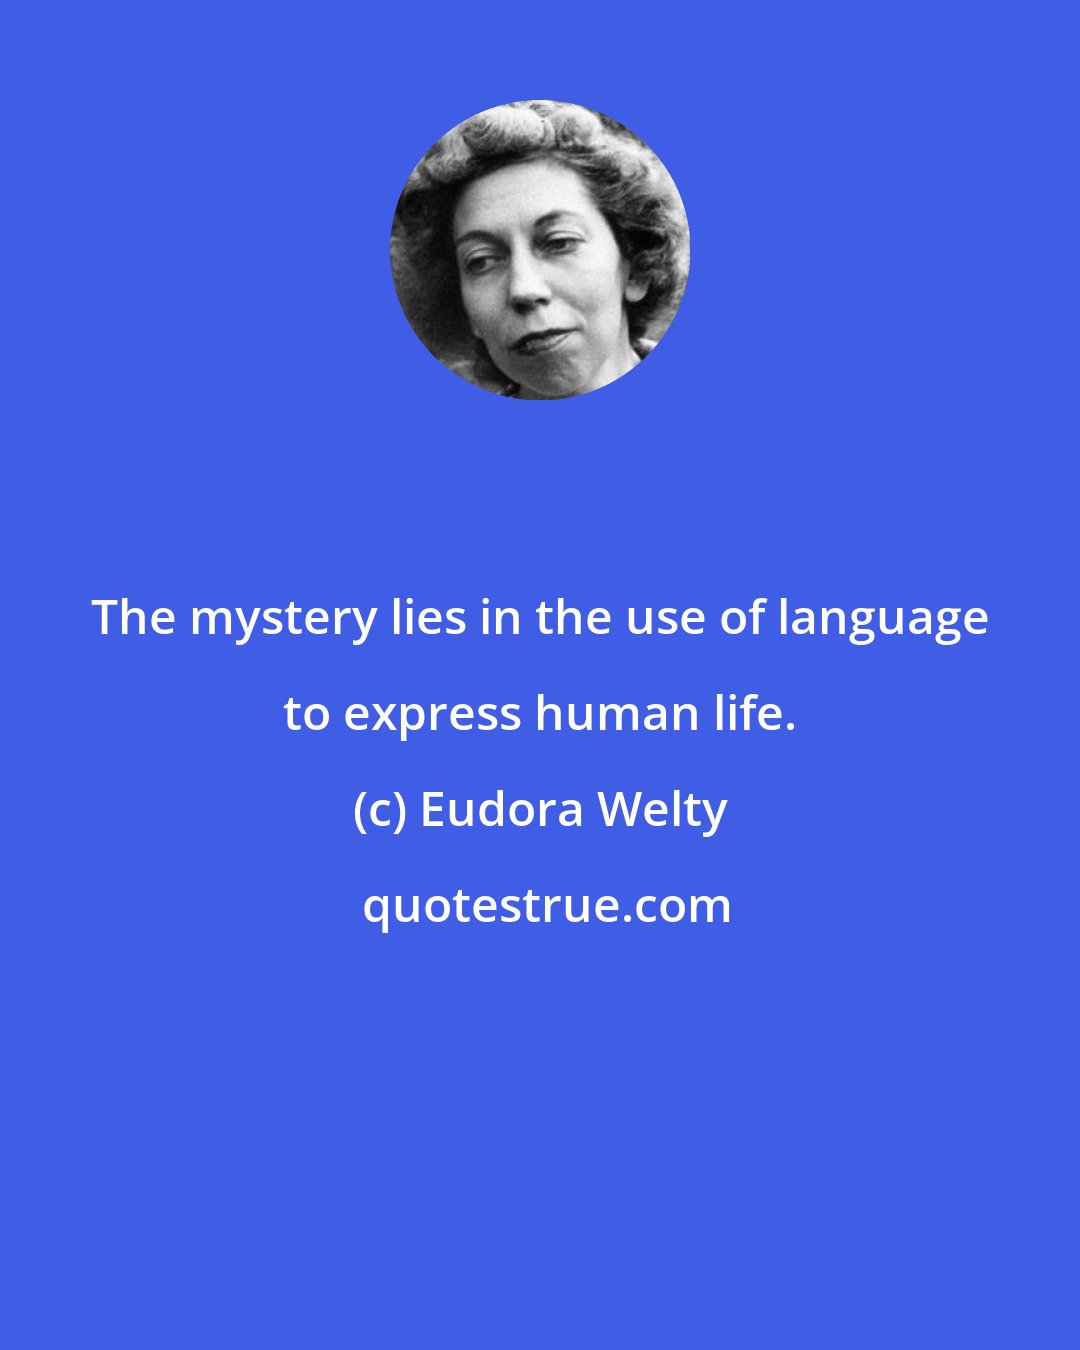 Eudora Welty: The mystery lies in the use of language to express human life.